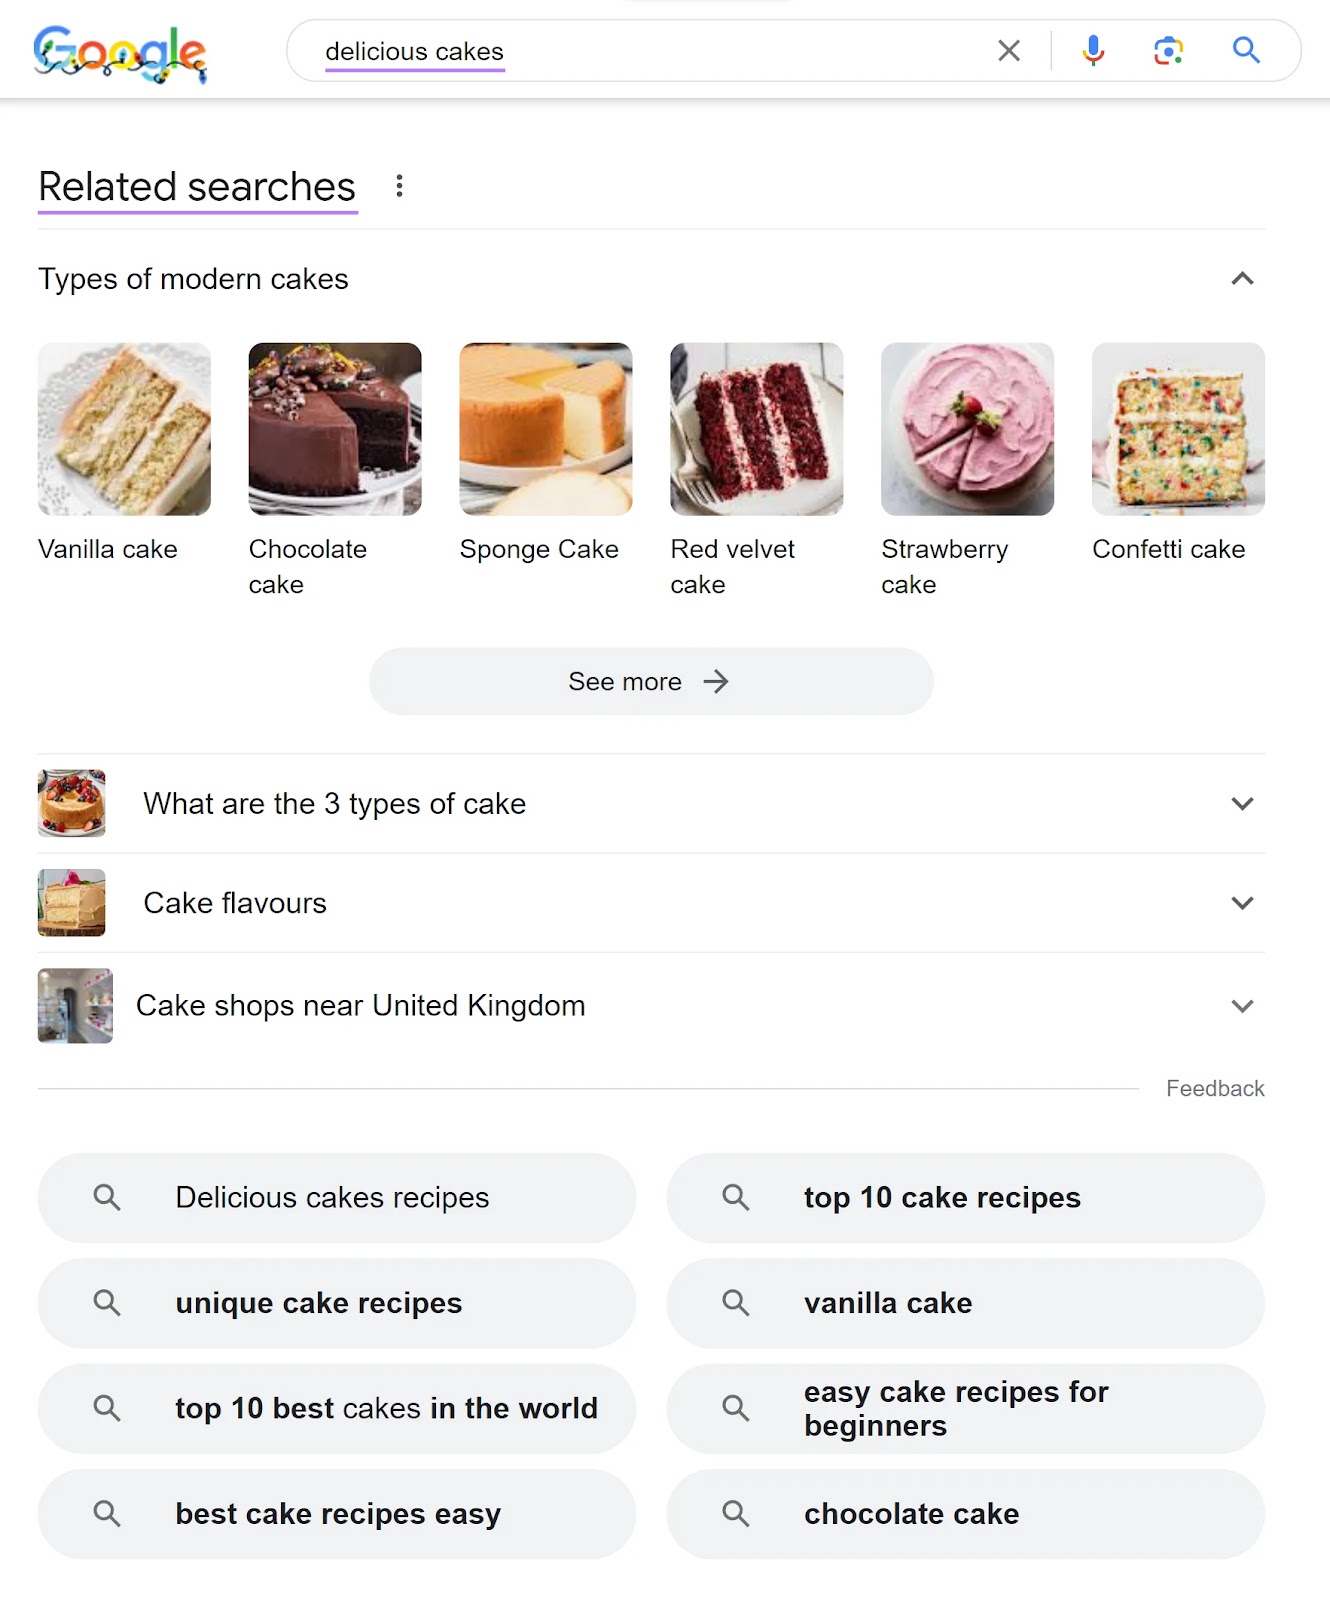 “Related searches” conception  connected  SERP for "delicious cakes" query